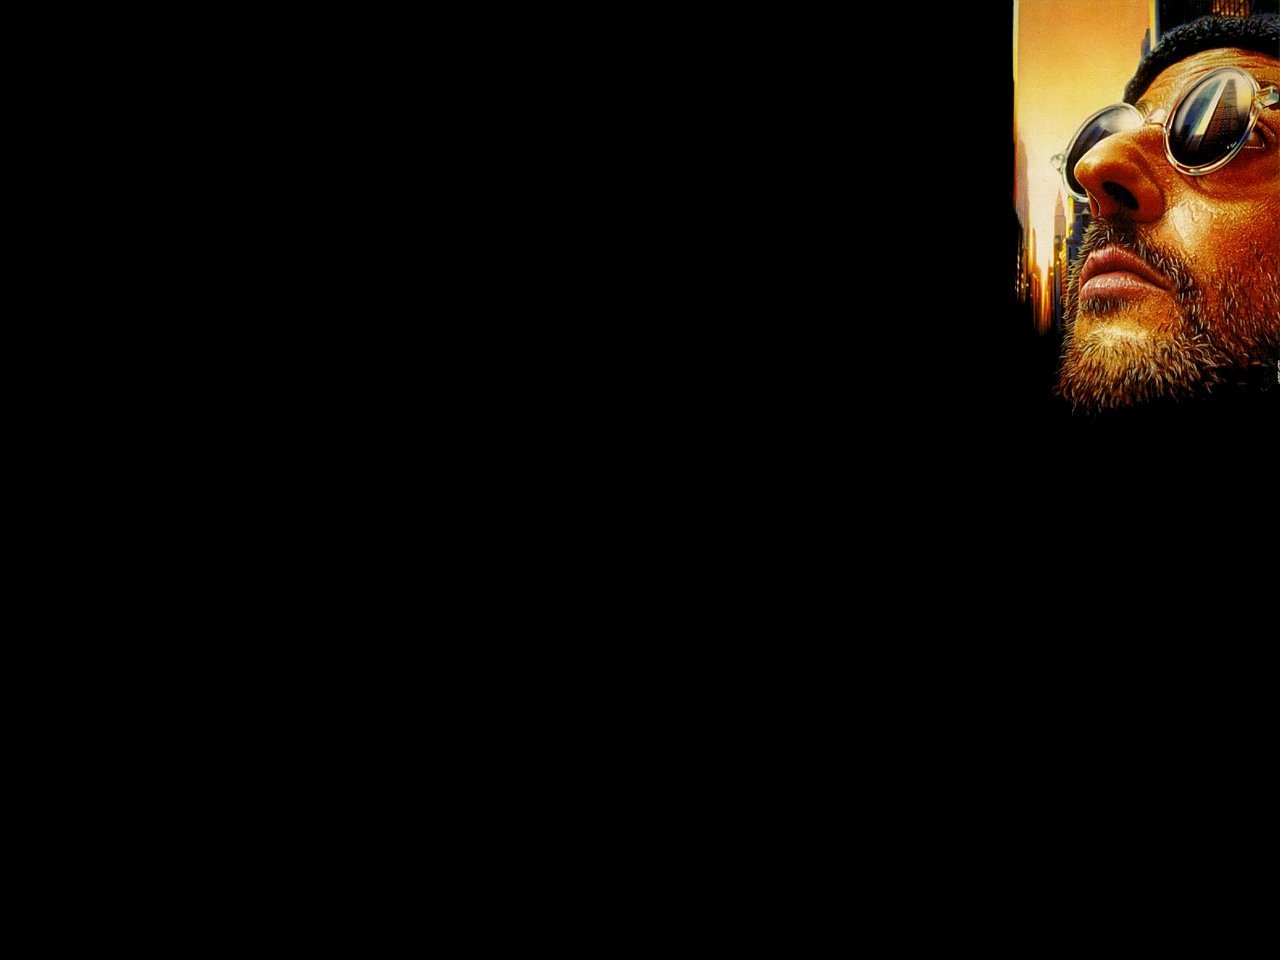 Leon The Professional Wallpapers Hd For Desktop Backgrounds